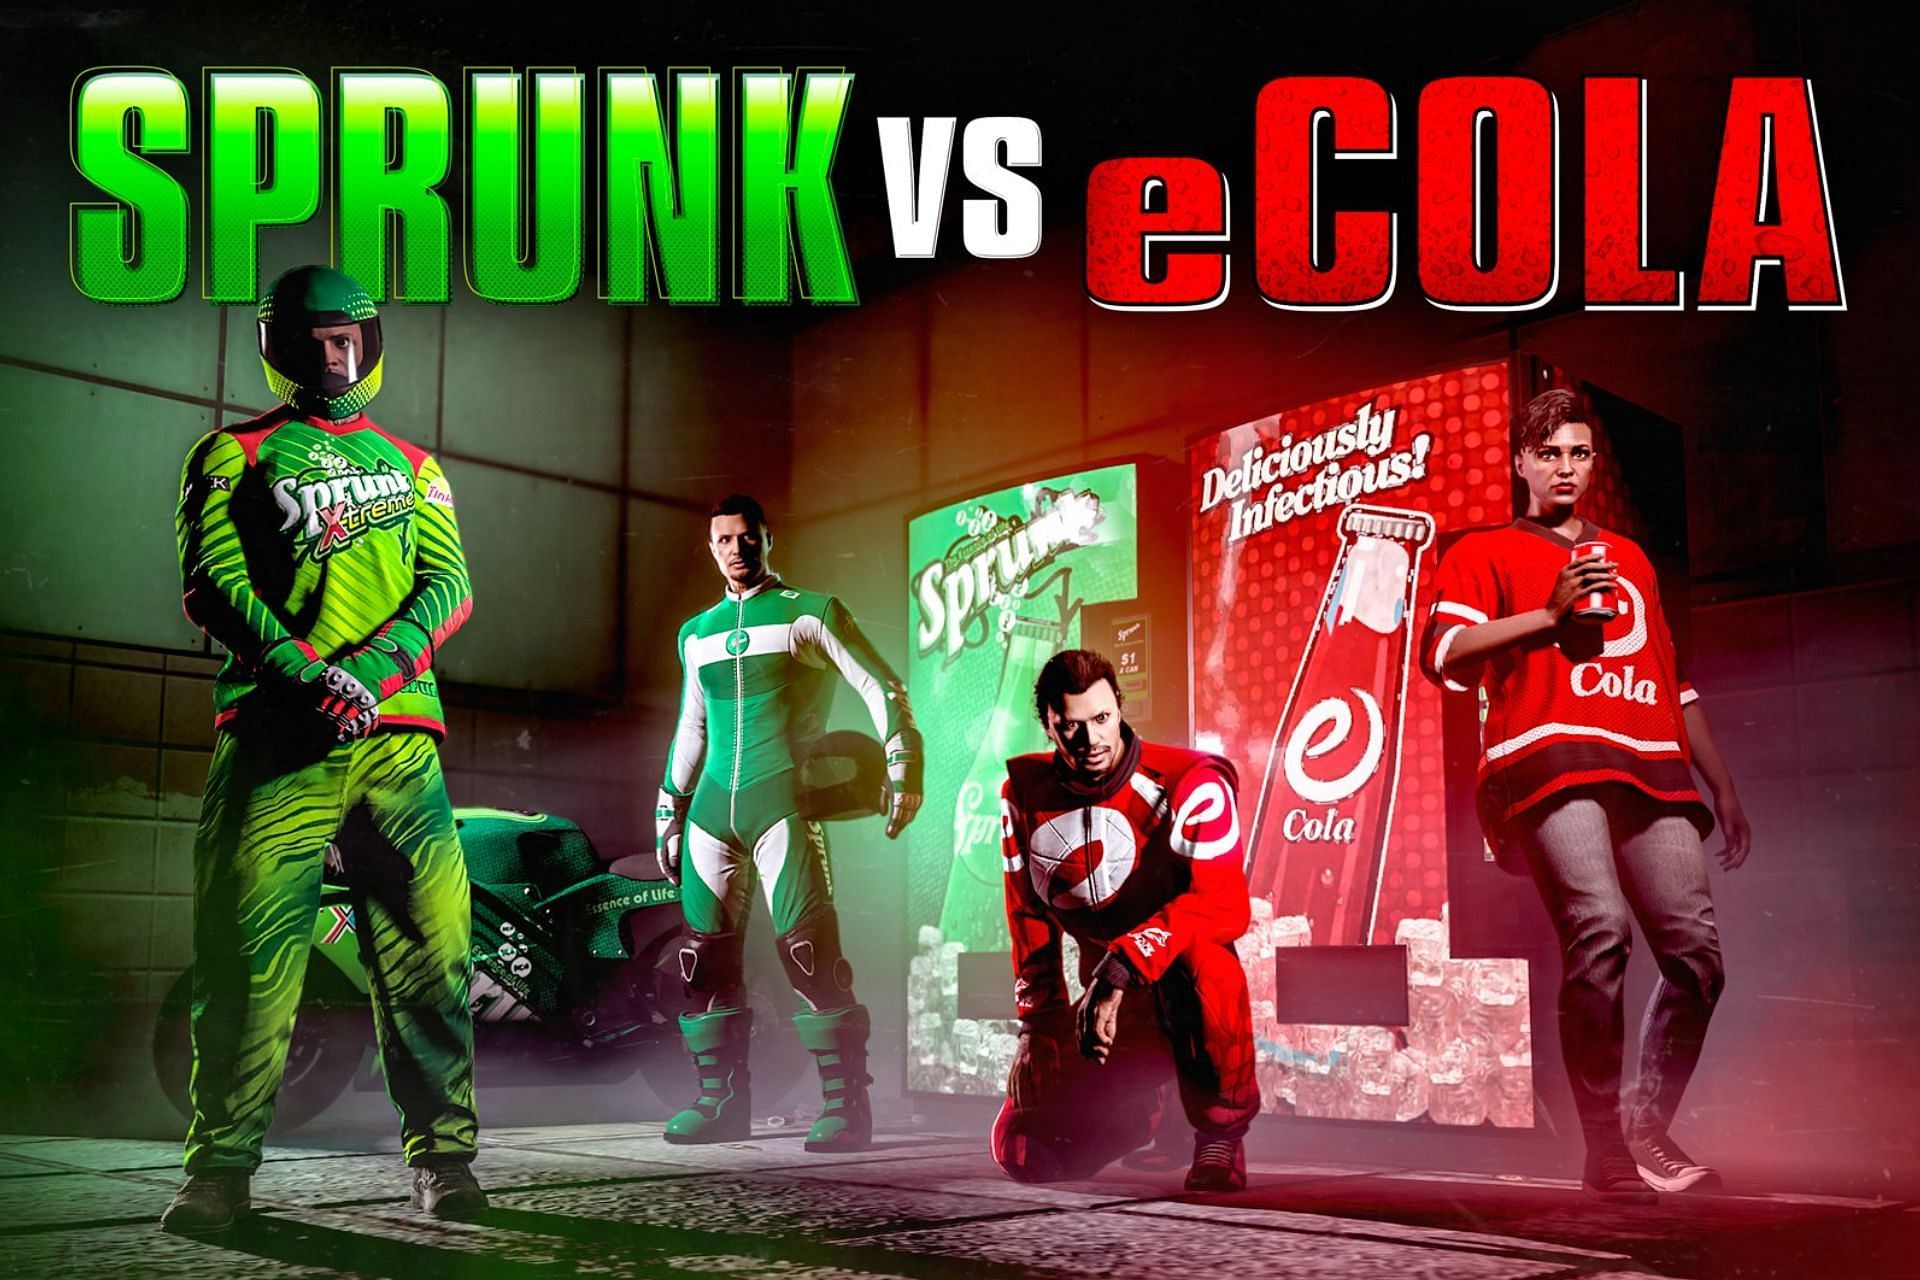 The Sprunk vs. eCola war was one of the most entertaining events in GTA Online (Image via Rockstar Games)